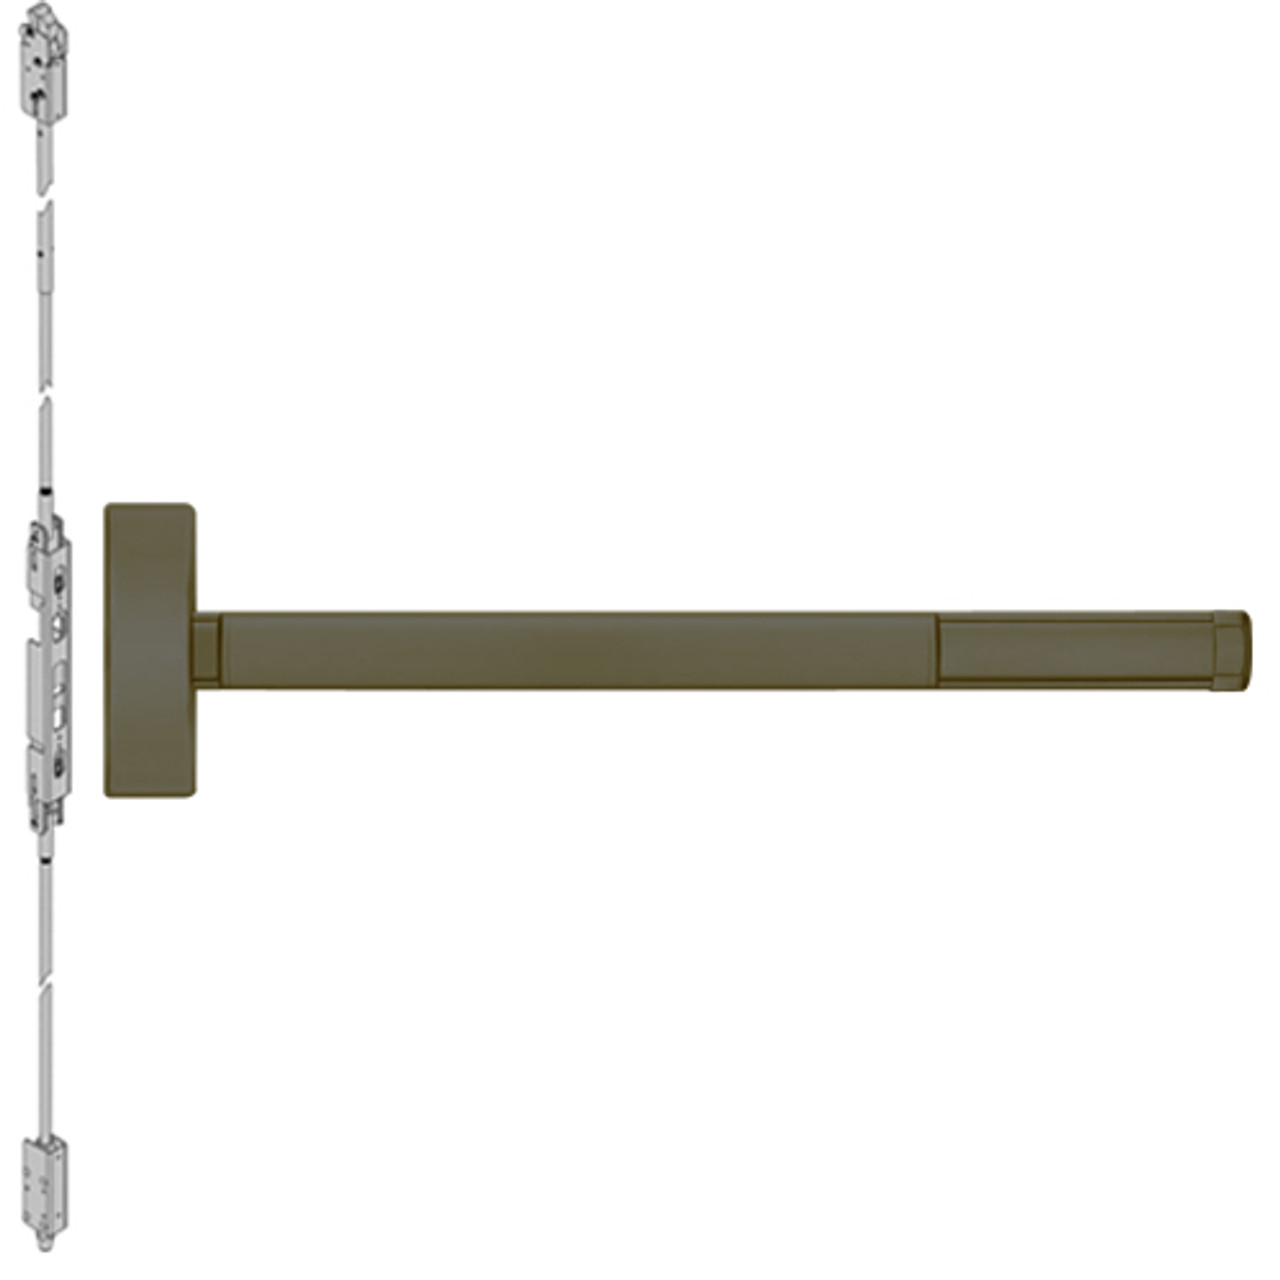 2803LBRCD-613-48 PHI 2800 Series Non Fire Rated Concealed Vertical Rod Exit Device Prepped for Key Retracts Latchbolt in Oil Rubbed Bronze Finish